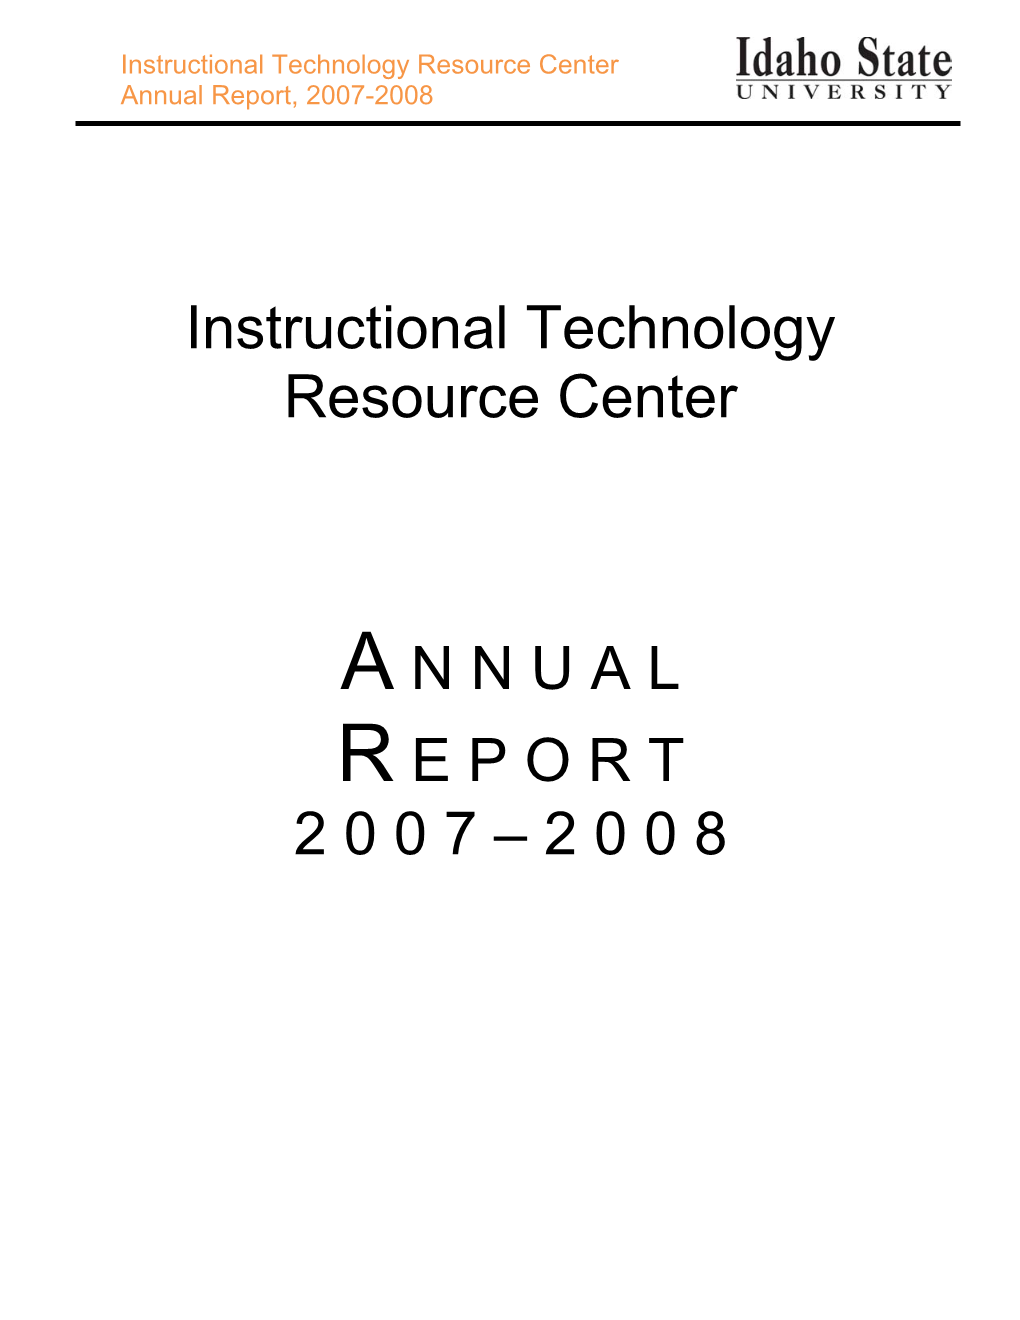 Instructional Technology Resource Center Annual Report, 2007-2008